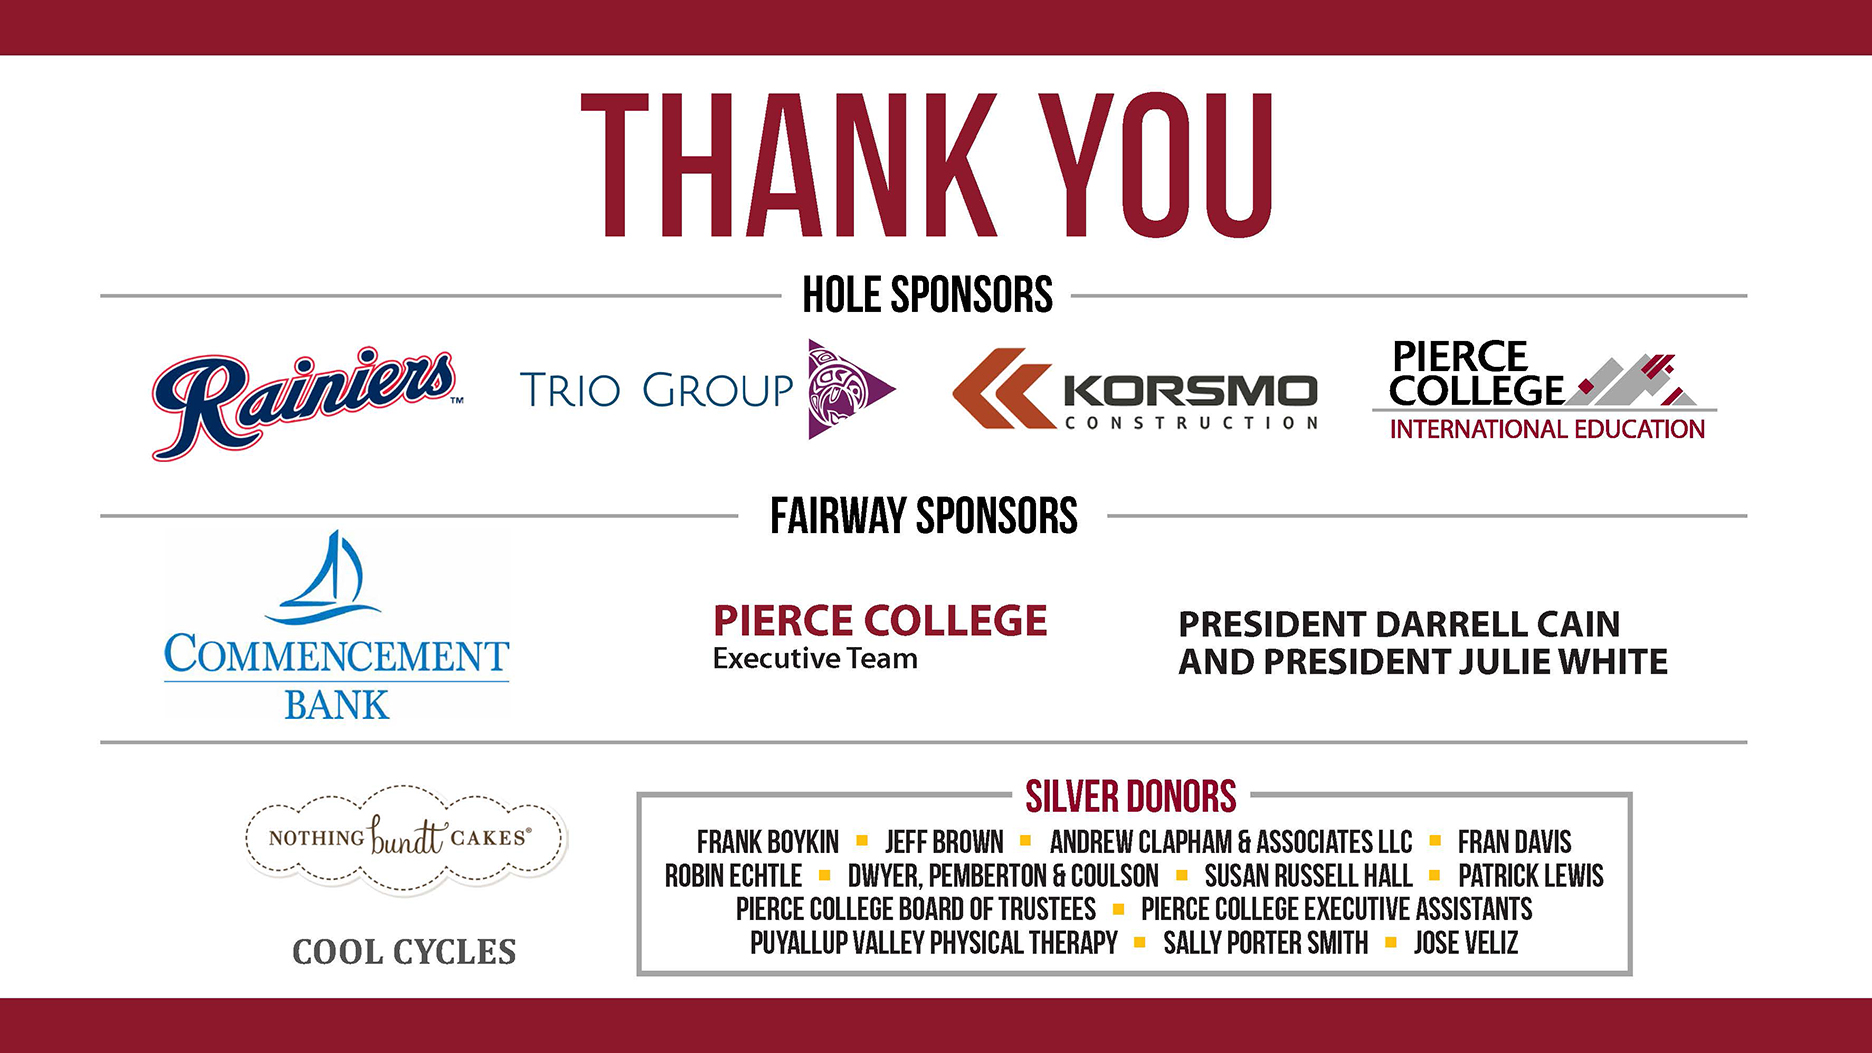 Thank You to Rainers, Trio Group, Korsmo Construction, Pierce College International Education, Commencement Bank, Pierce College Executive Team, Presidents Darrell Cain and Julie White, Nothing Bundt Cakes, Cool Cycles, Frank Boykin, Jeff Brown, Andrew Clapham & Associates, Fran Davis, Robin Echtle, Dwyer, Pemberton & Coulson, Susan Russell Hall, Patrick Lewis, Pierce College Board of Trustees, Pierce College Executive Assistants, Puyallup Valley Physical Therapy, Sally Porter Smith, and Jose Veliz